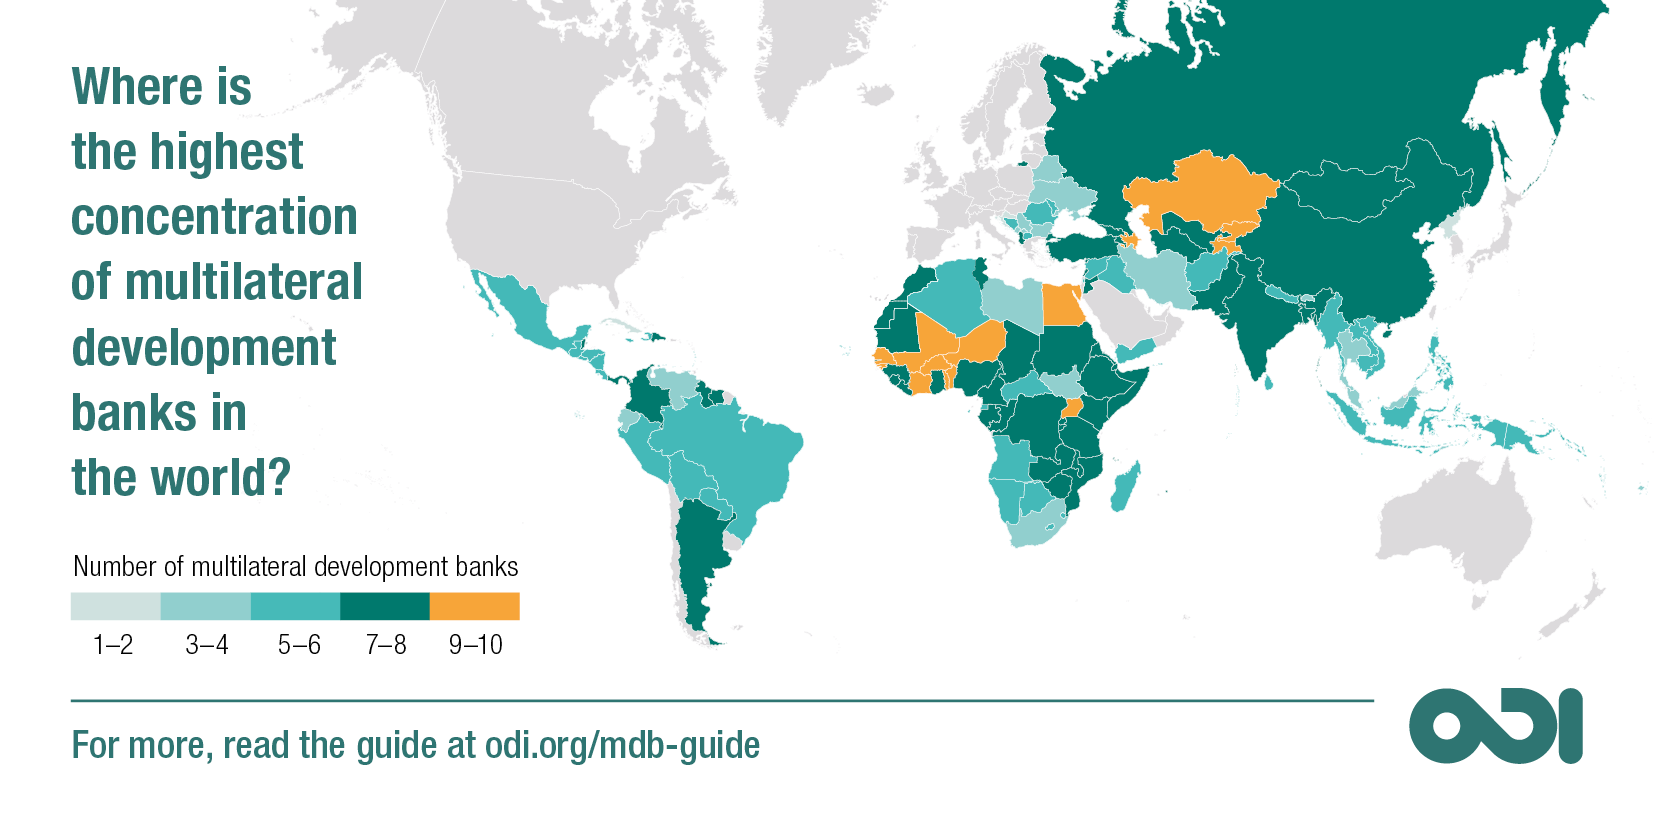 Where is the highest concentration of multilateral development banks in the world?